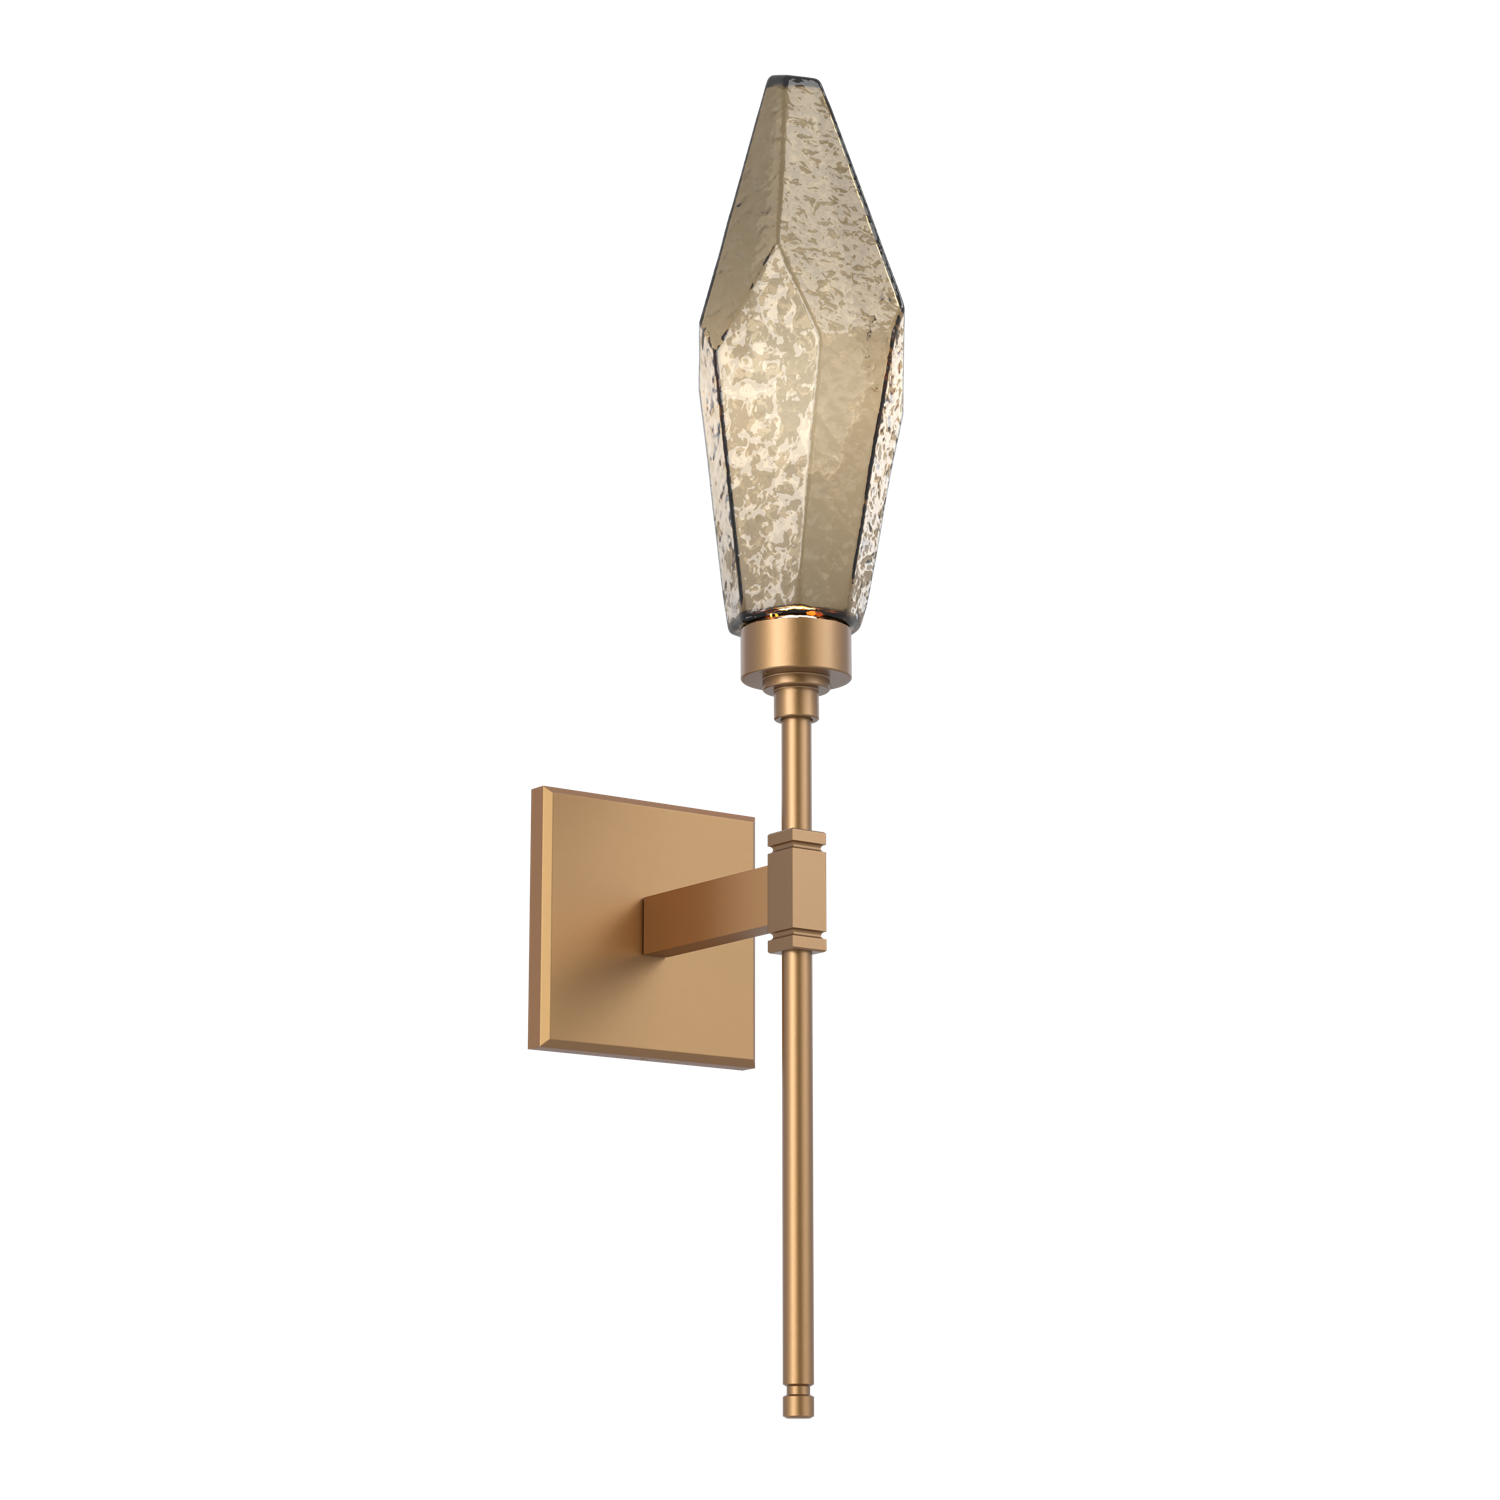 IDB0050-07-NB-CB-Hammerton-Studio-Rock-Crystal-belvedere-wall-sconce-with-novel-brass-finish-and-chilled-bronze-blown-glass-shades-and-LED-lamping